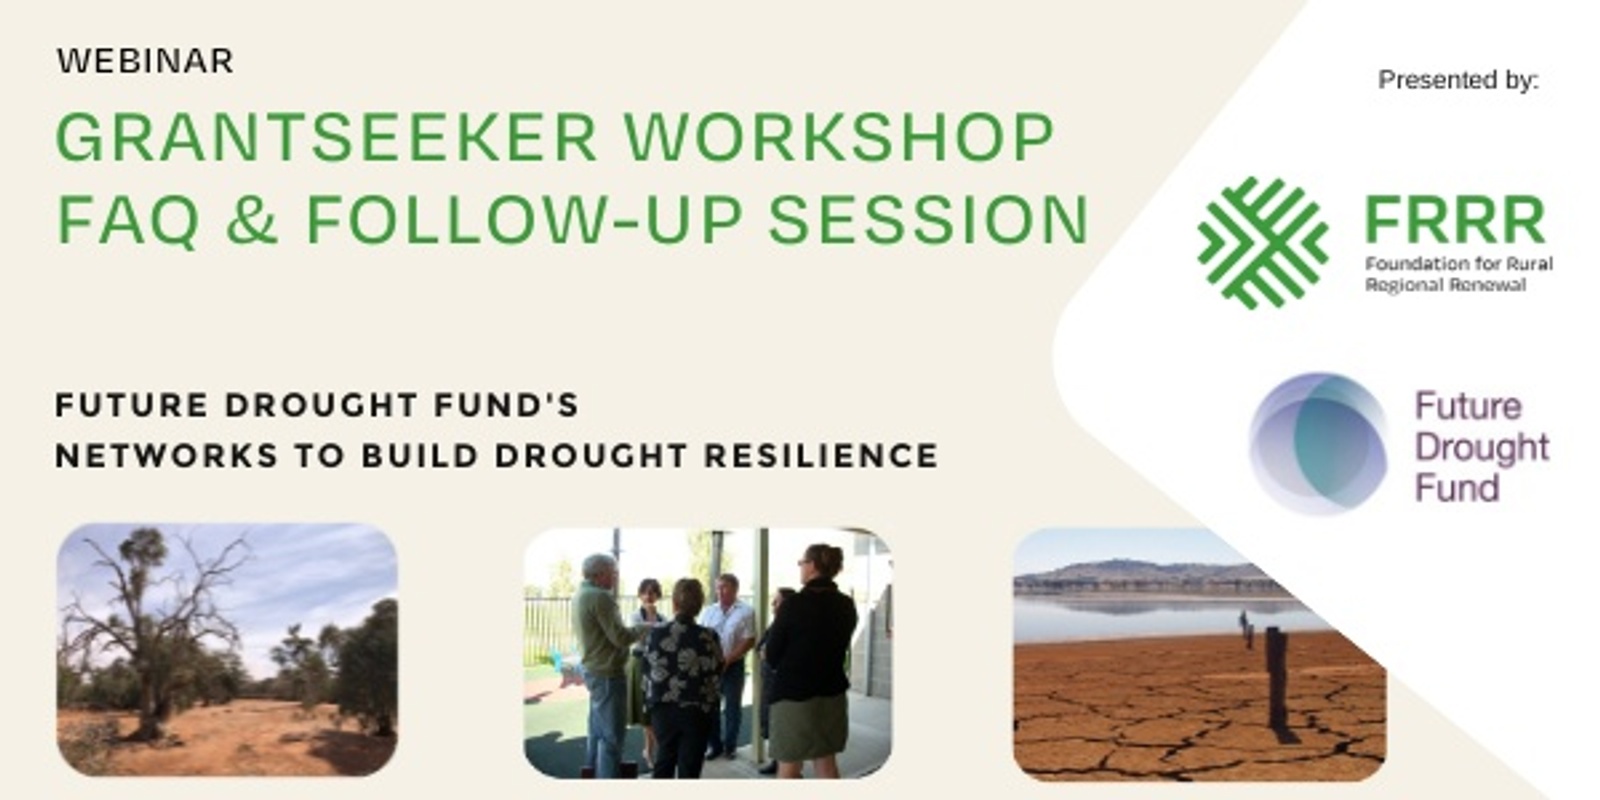 Banner image for FRRR Grantseeker Workshop, FAQ & Follow-Up session - Round 2 Networks to Build Drought Resilience